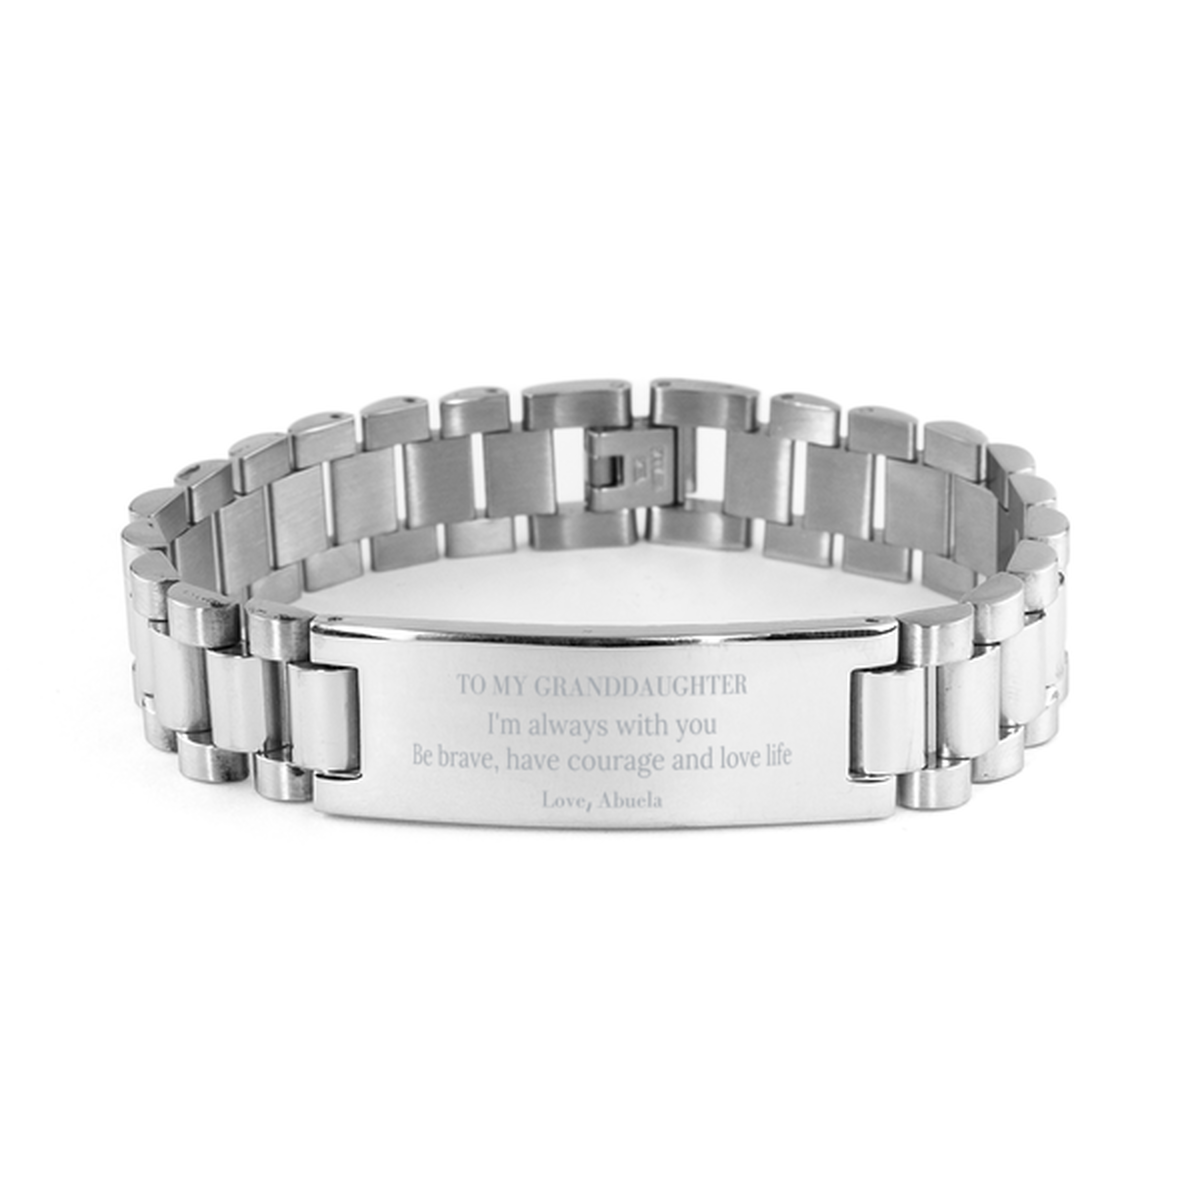 To My Granddaughter Gifts from Abuela, Unique Ladder Stainless Steel Bracelet Inspirational Christmas Birthday Graduation Gifts for Granddaughter I'm always with you. Be brave, have courage and love life. Love, Abuela